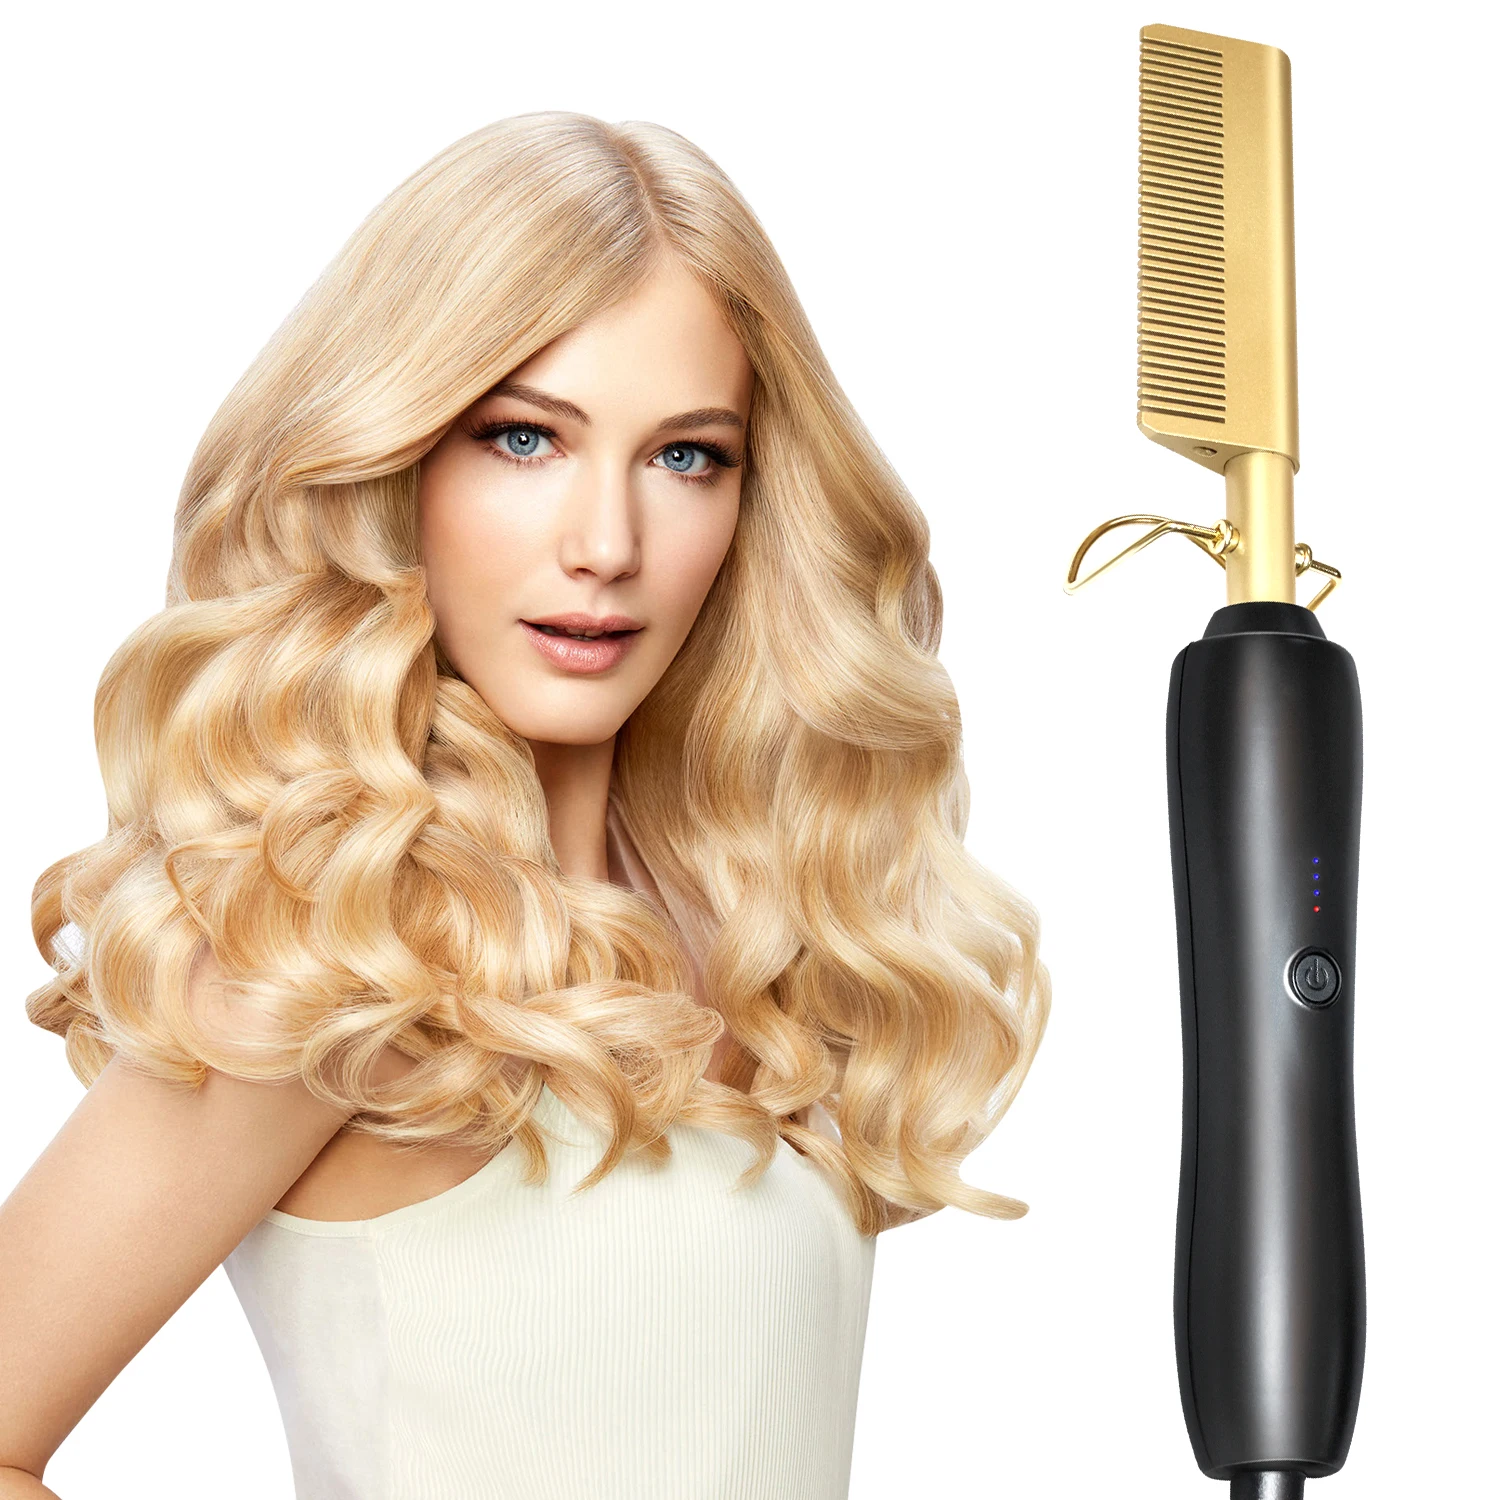 

2 in 1 New Private Label 500 Degrees Hot Heating Straightener Iron Brush Hair Curler Straightening Hot Comb Electric for Wave, Black,gold